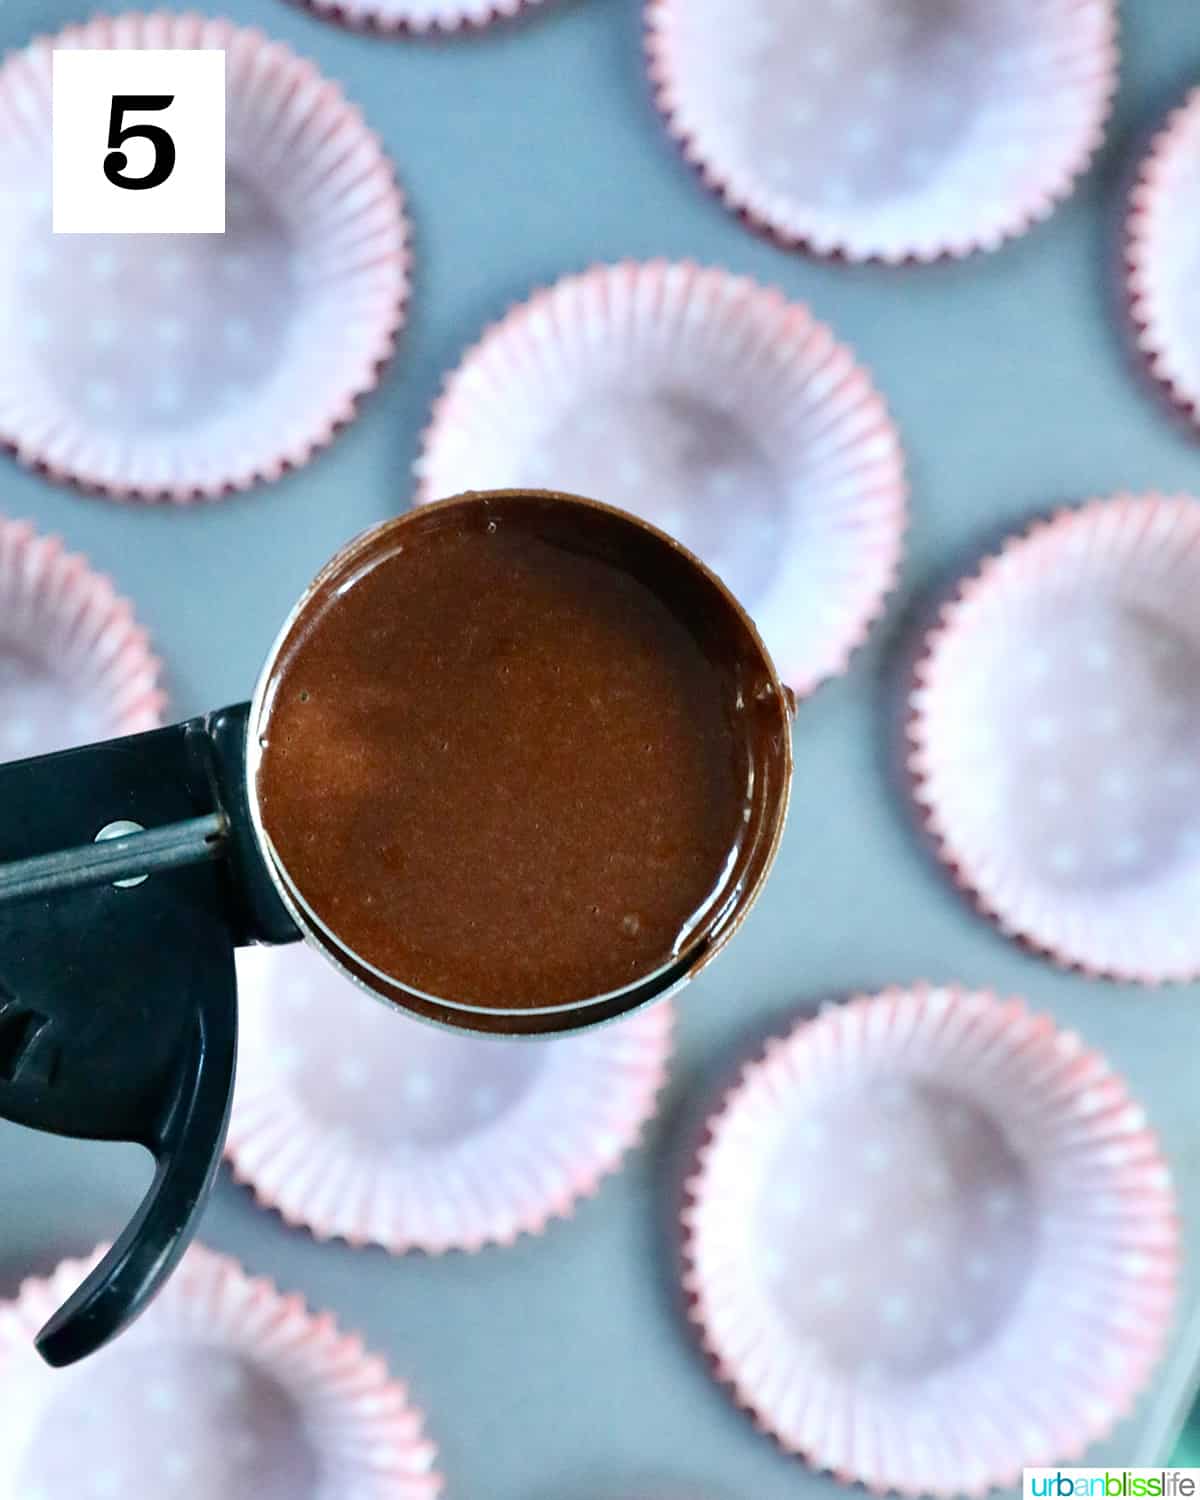 cookie scoop full of chocolate cupcake batter over a muffin tin.